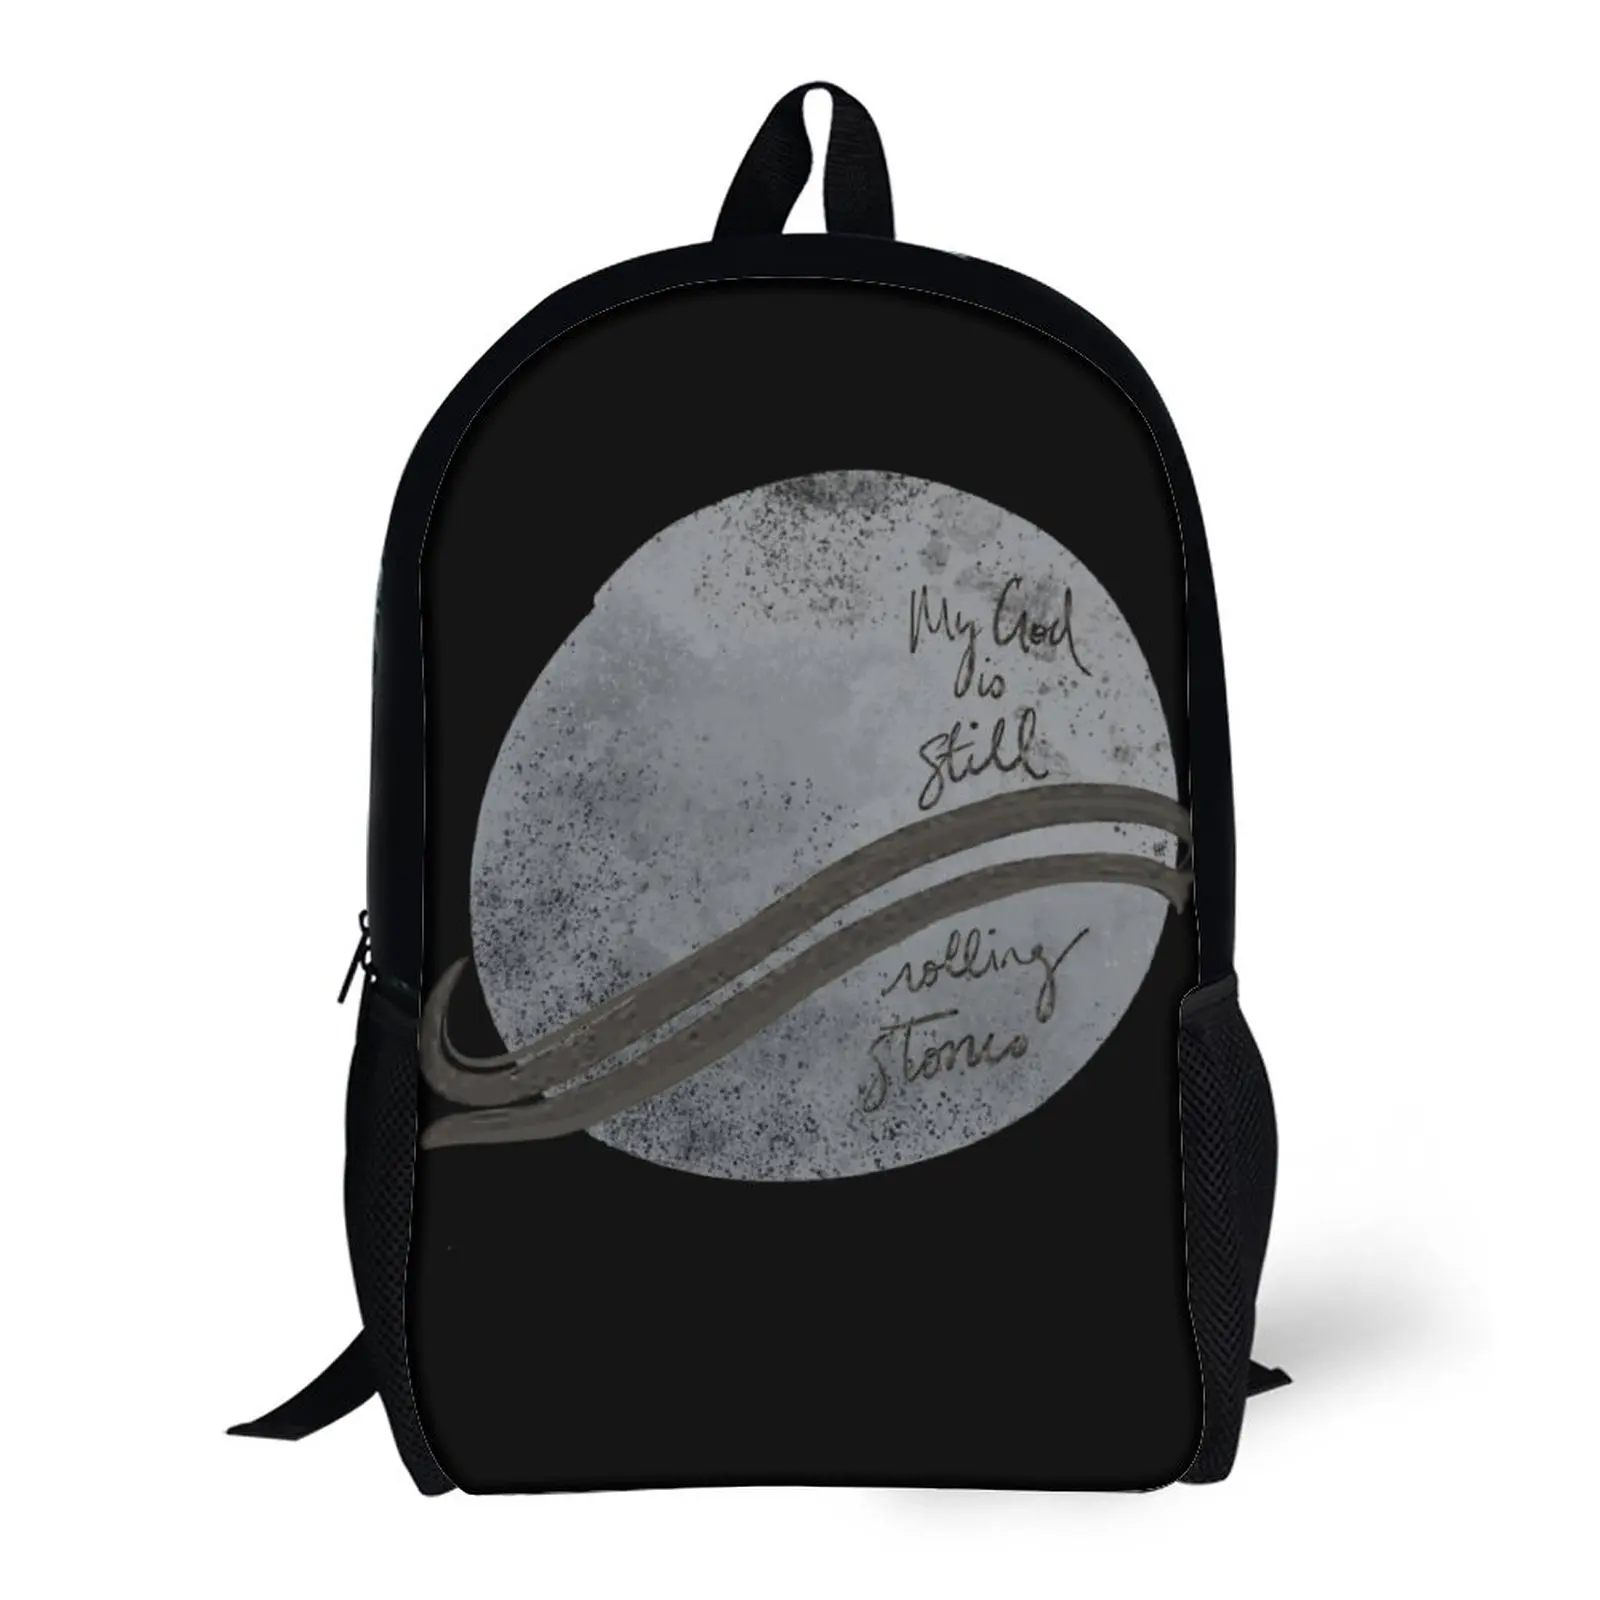 

Still Roll N Stone Lauren Daigle Firm Cosy Field Pack17 Inch Shoulder Backpack Vintage Sports Activities Casual Graphic